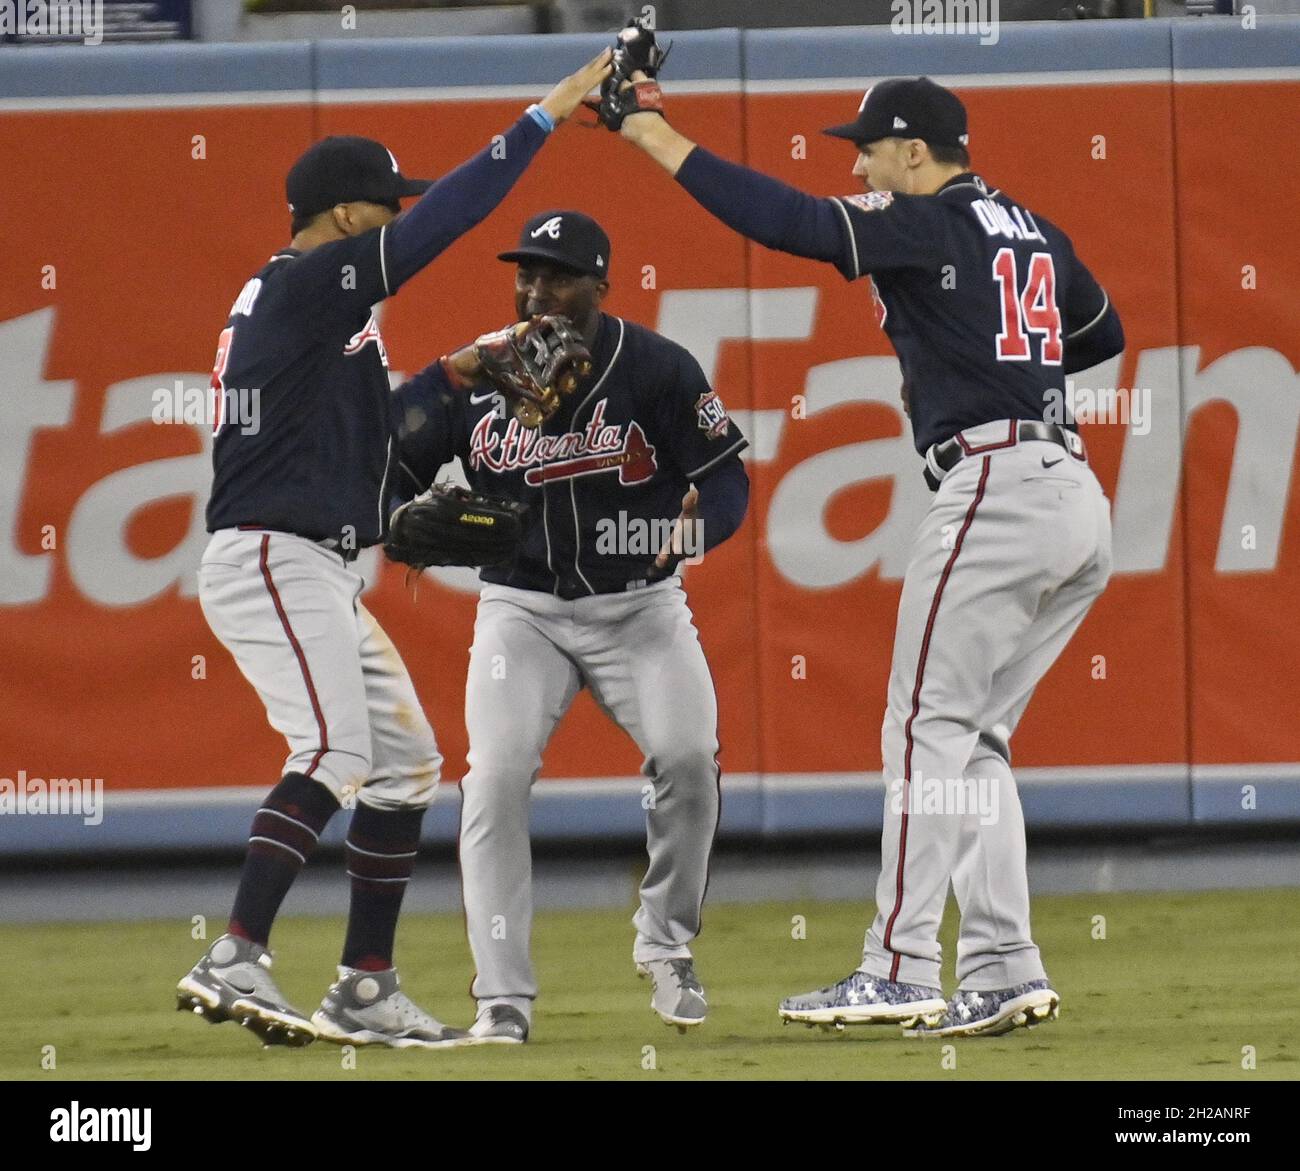 Los Angeles, United States. 21st Oct, 2021. Outfielders (L-R) Eddie Rosario, Guilermo Heredia, and Adam Duvall celebrate defeating the Los Angels Dodgers in game four of the MLB NLCS at Dodger Stadium on Wednesday, October 20, 2021 in Los Angeles, California. Winning game four 9-2, Atlanta leads Los Angeles 3-1 in the championship series. Photo by Jim Ruymen/UPI Credit: UPI/Alamy Live News Stock Photo